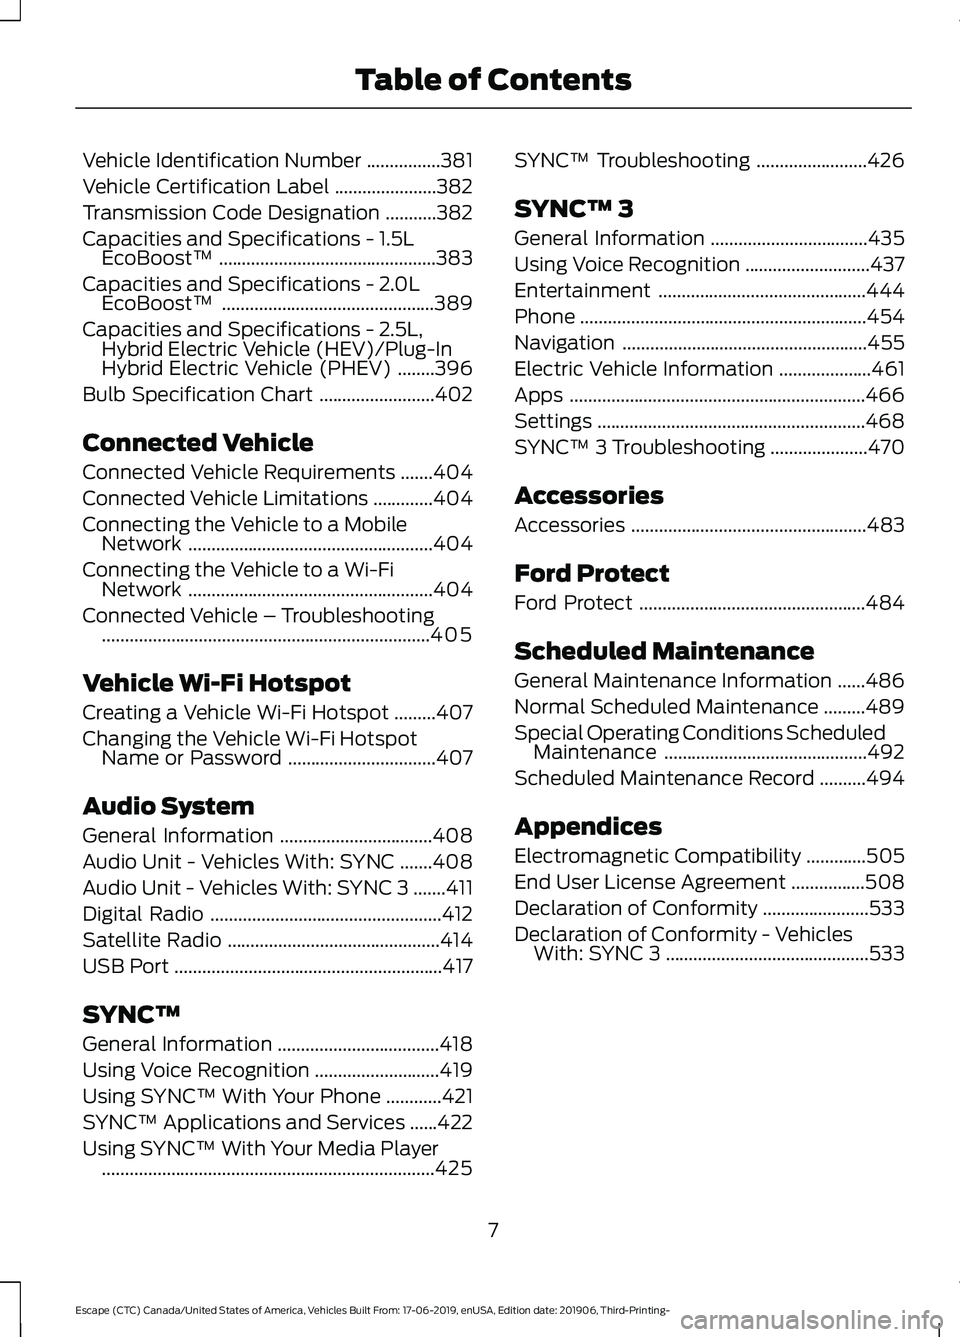 FORD ESCAPE 2020  Owners Manual Vehicle Identification Number
................381
Vehicle Certification Label ......................
382
Transmission Code Designation ...........
382
Capacities and Specifications - 1.5L EcoBoost™ 